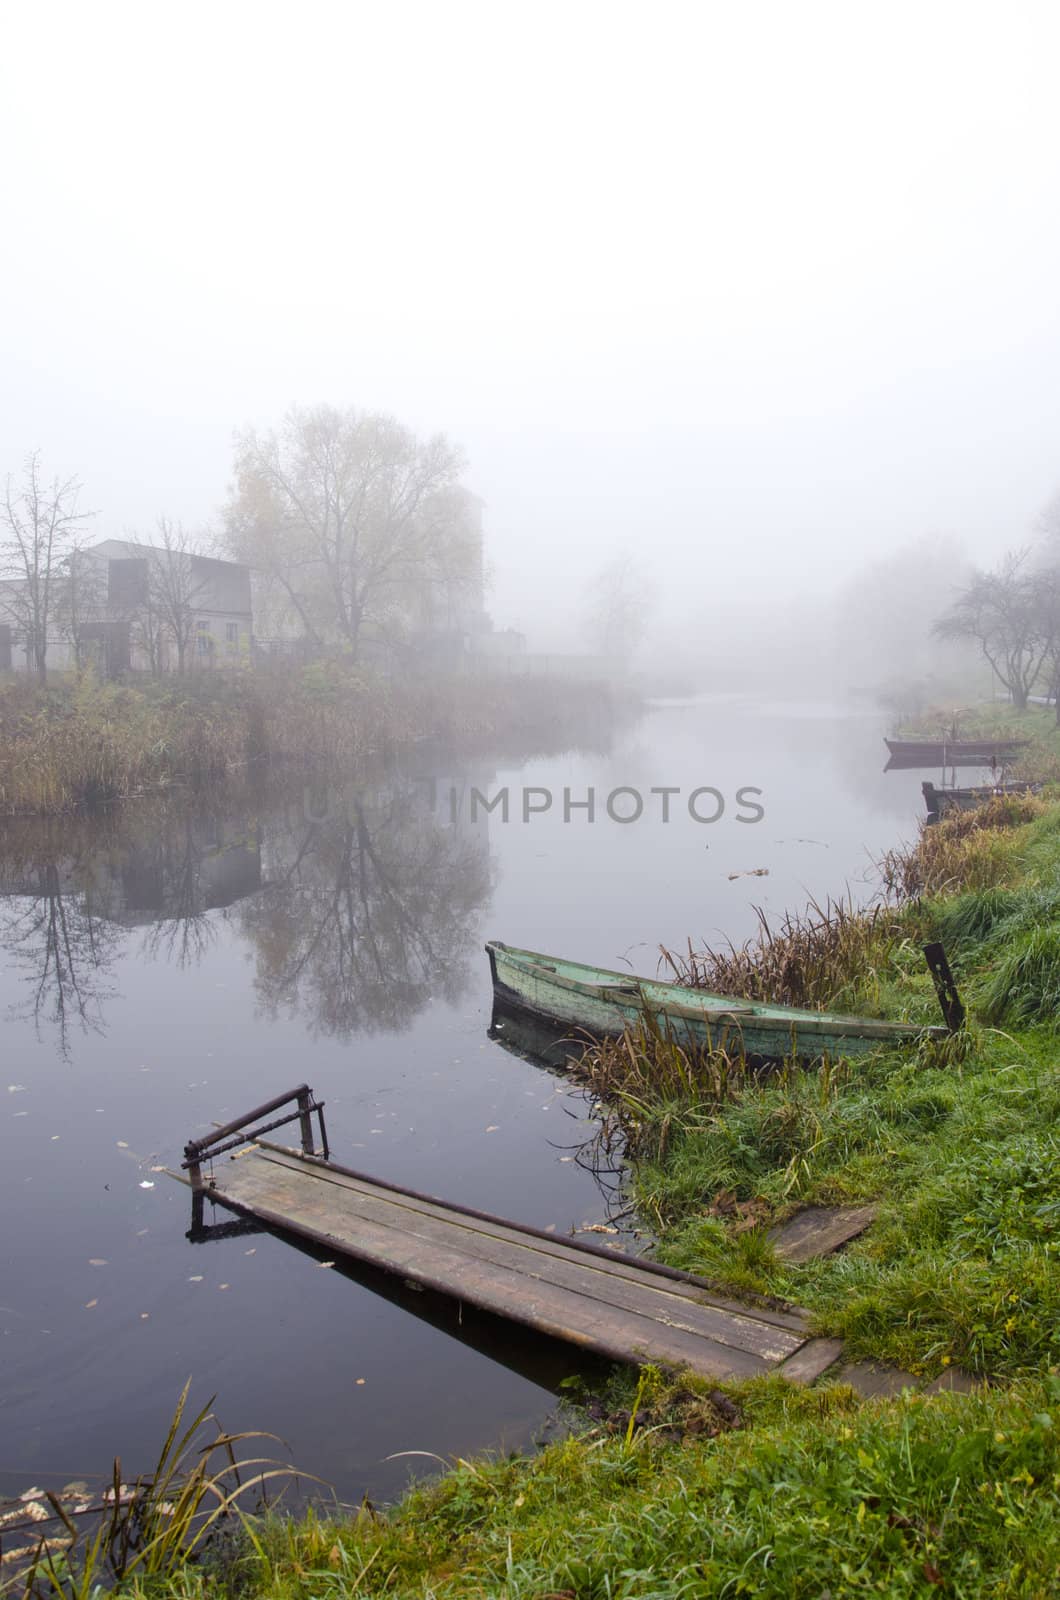 Wooden rowing boats and bridge standing on coast of river sunken in mysterious dence fog.